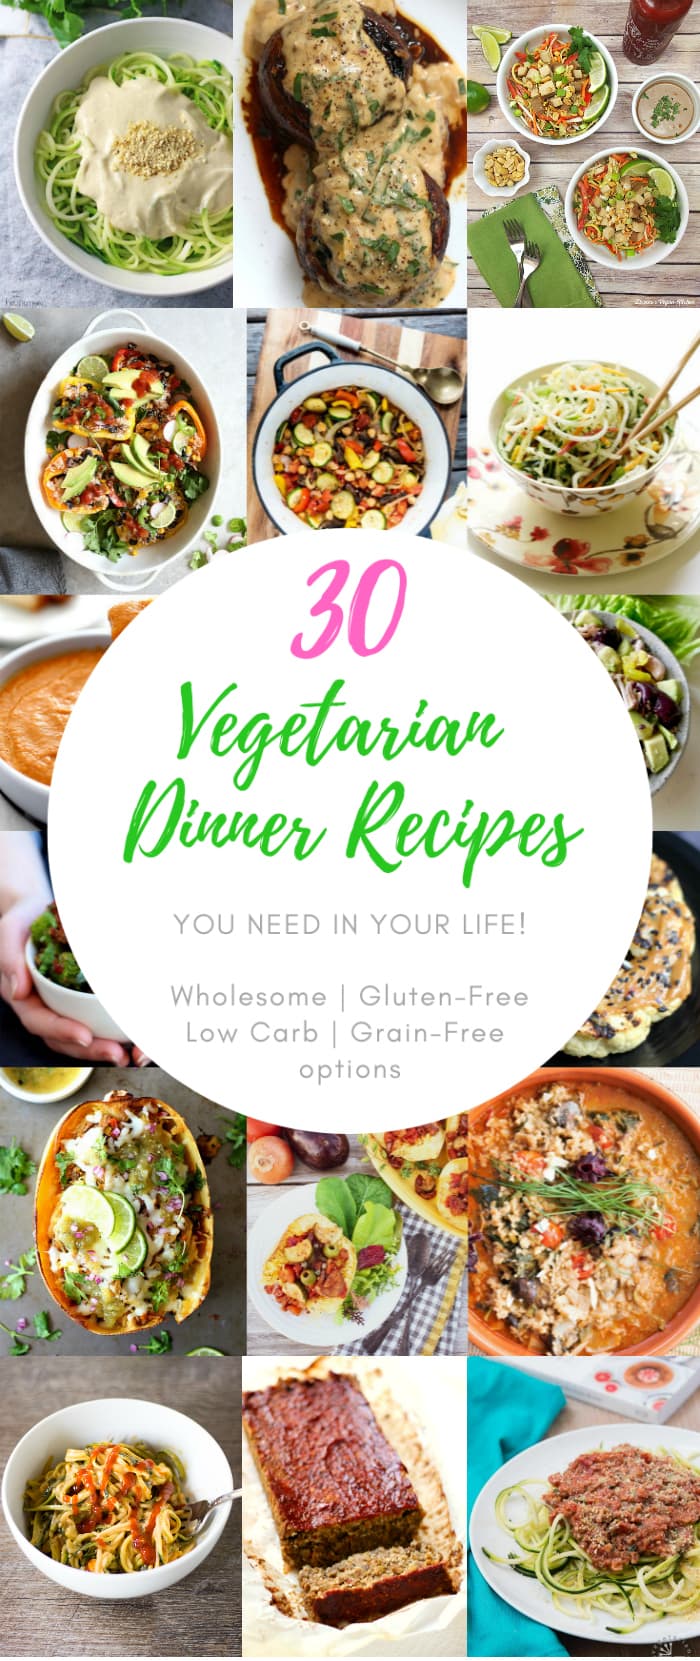 30 Easy Vegetarian Dinner Recipes you need in your life! #vegetarian #dinners #glutenfree #lowcarb #easy #healthy | Delightful Mom Food